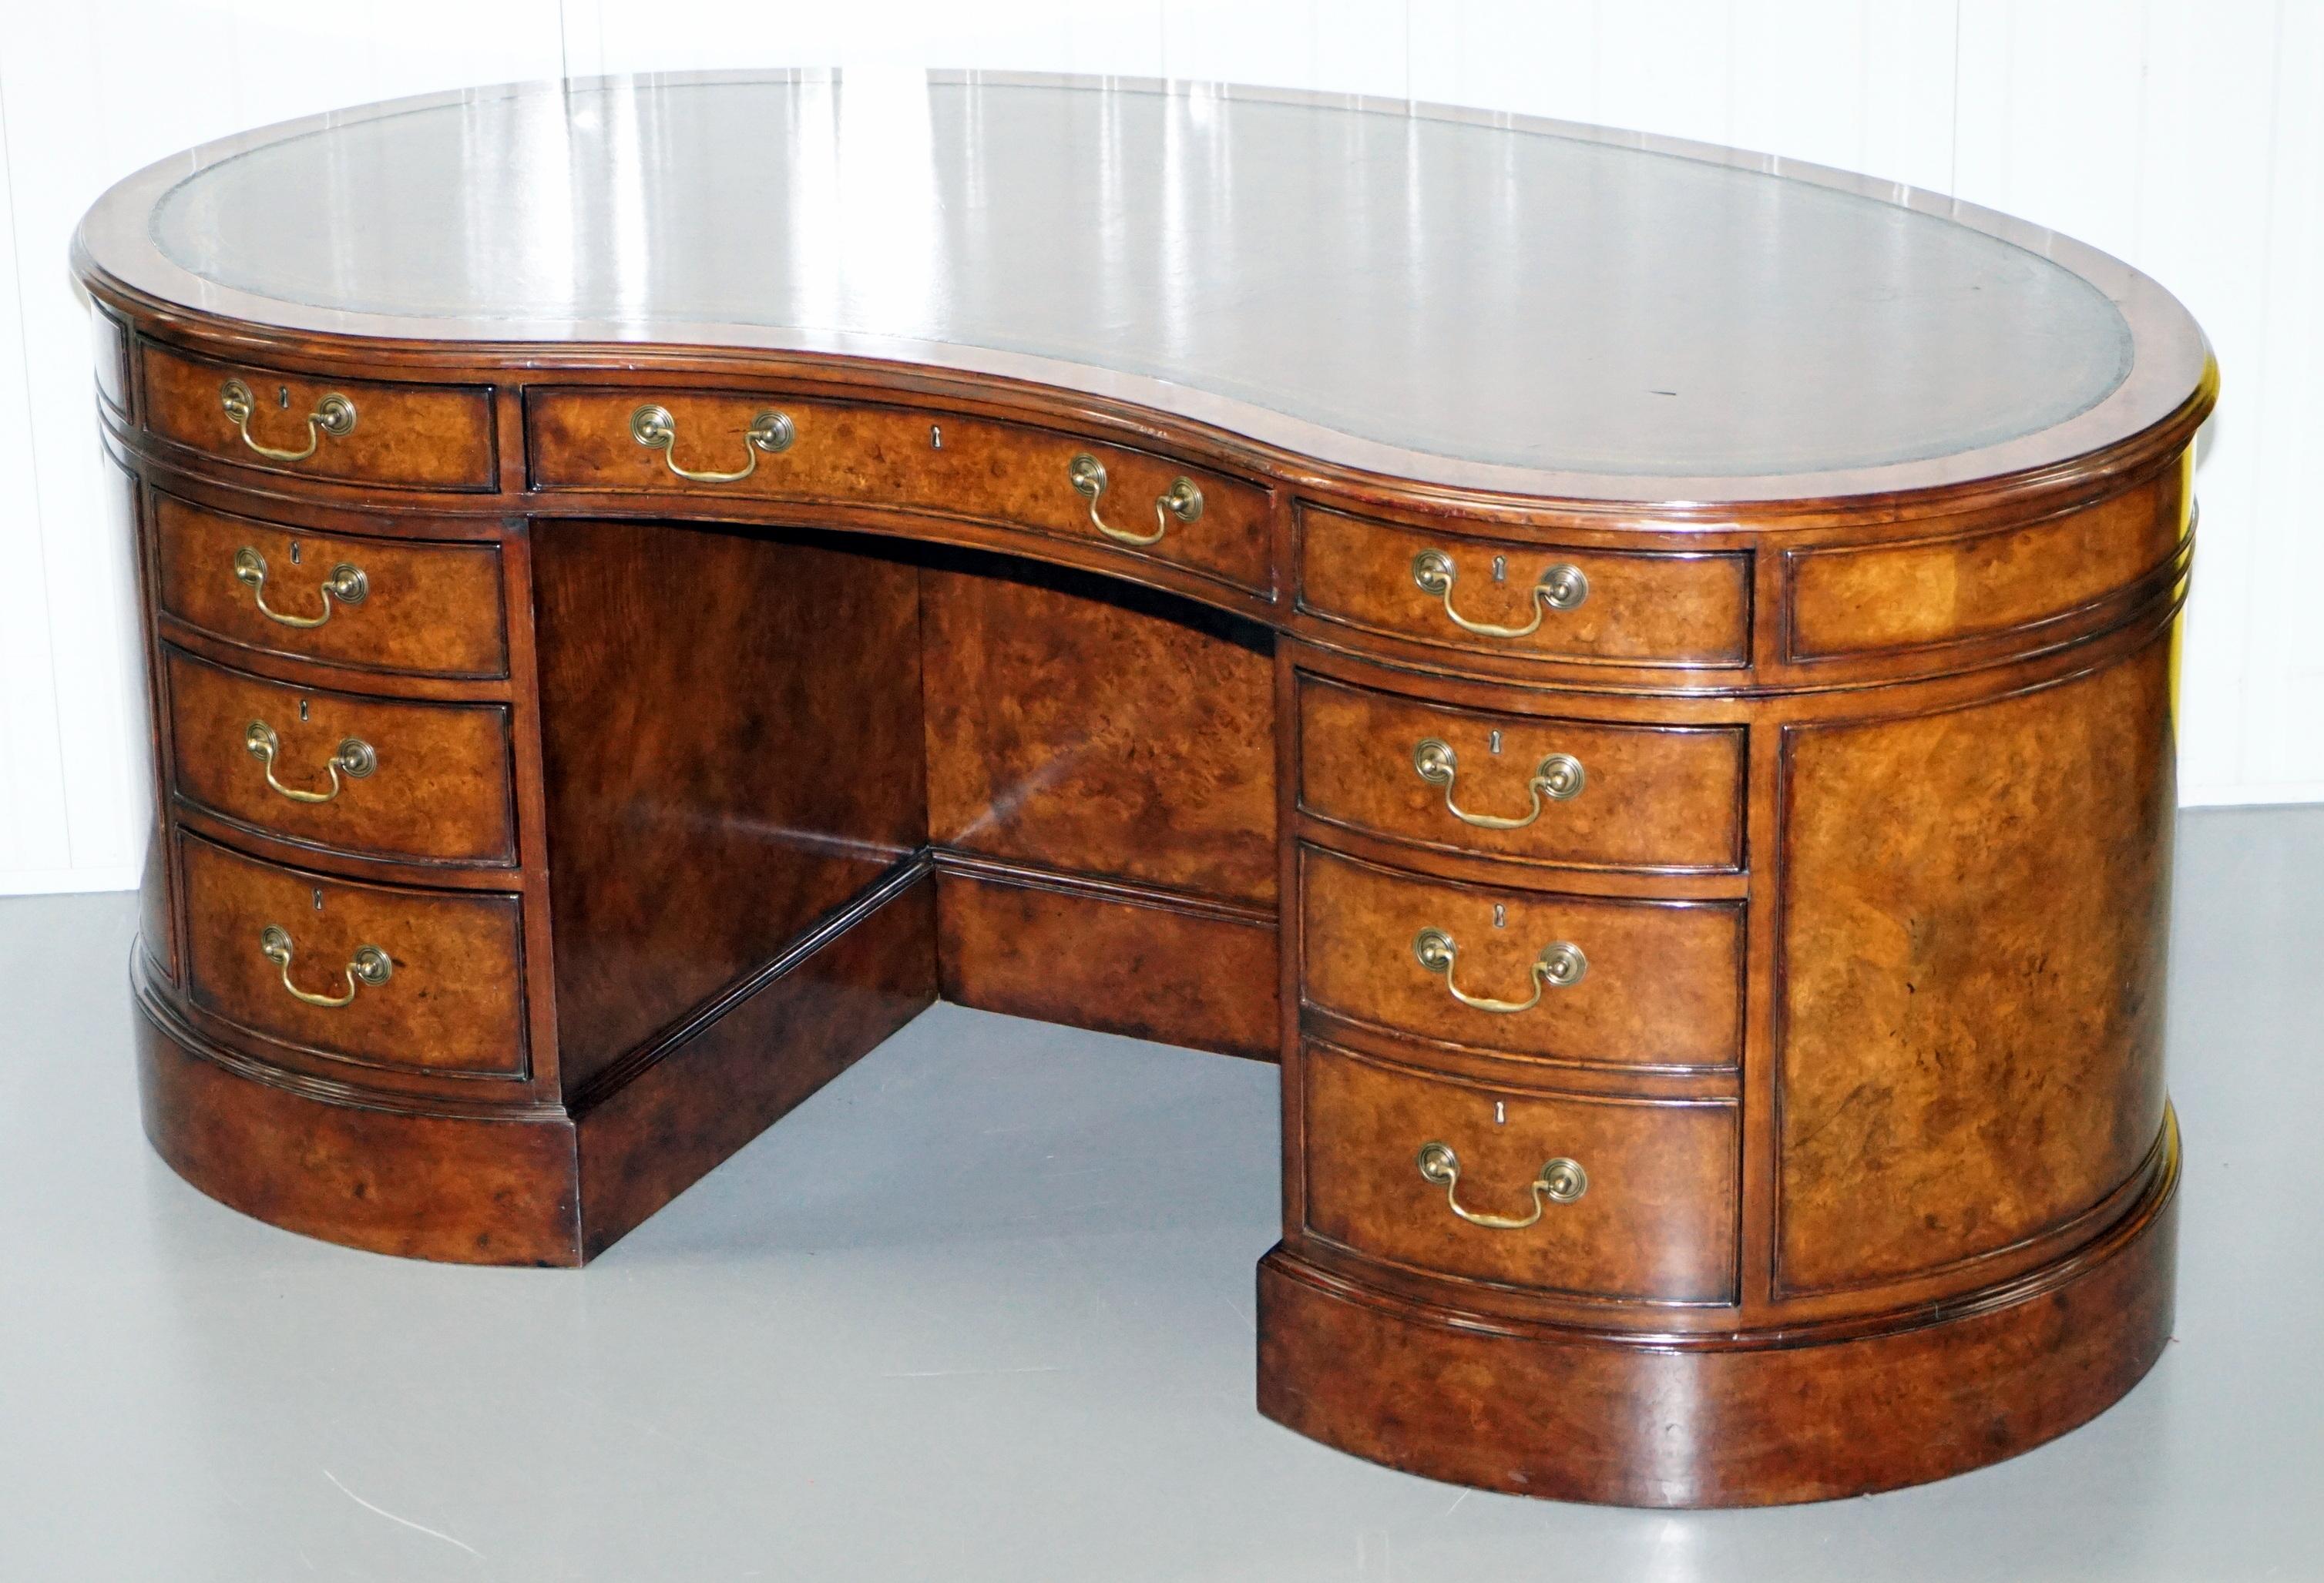 We are delighted to this stunning burr walnut kidney shaped desk with built in bookshelf and back cupboards

These desks are very expensive and rarely come on the preowned market. The desk is after a design by Gillows of Lancaster and London which